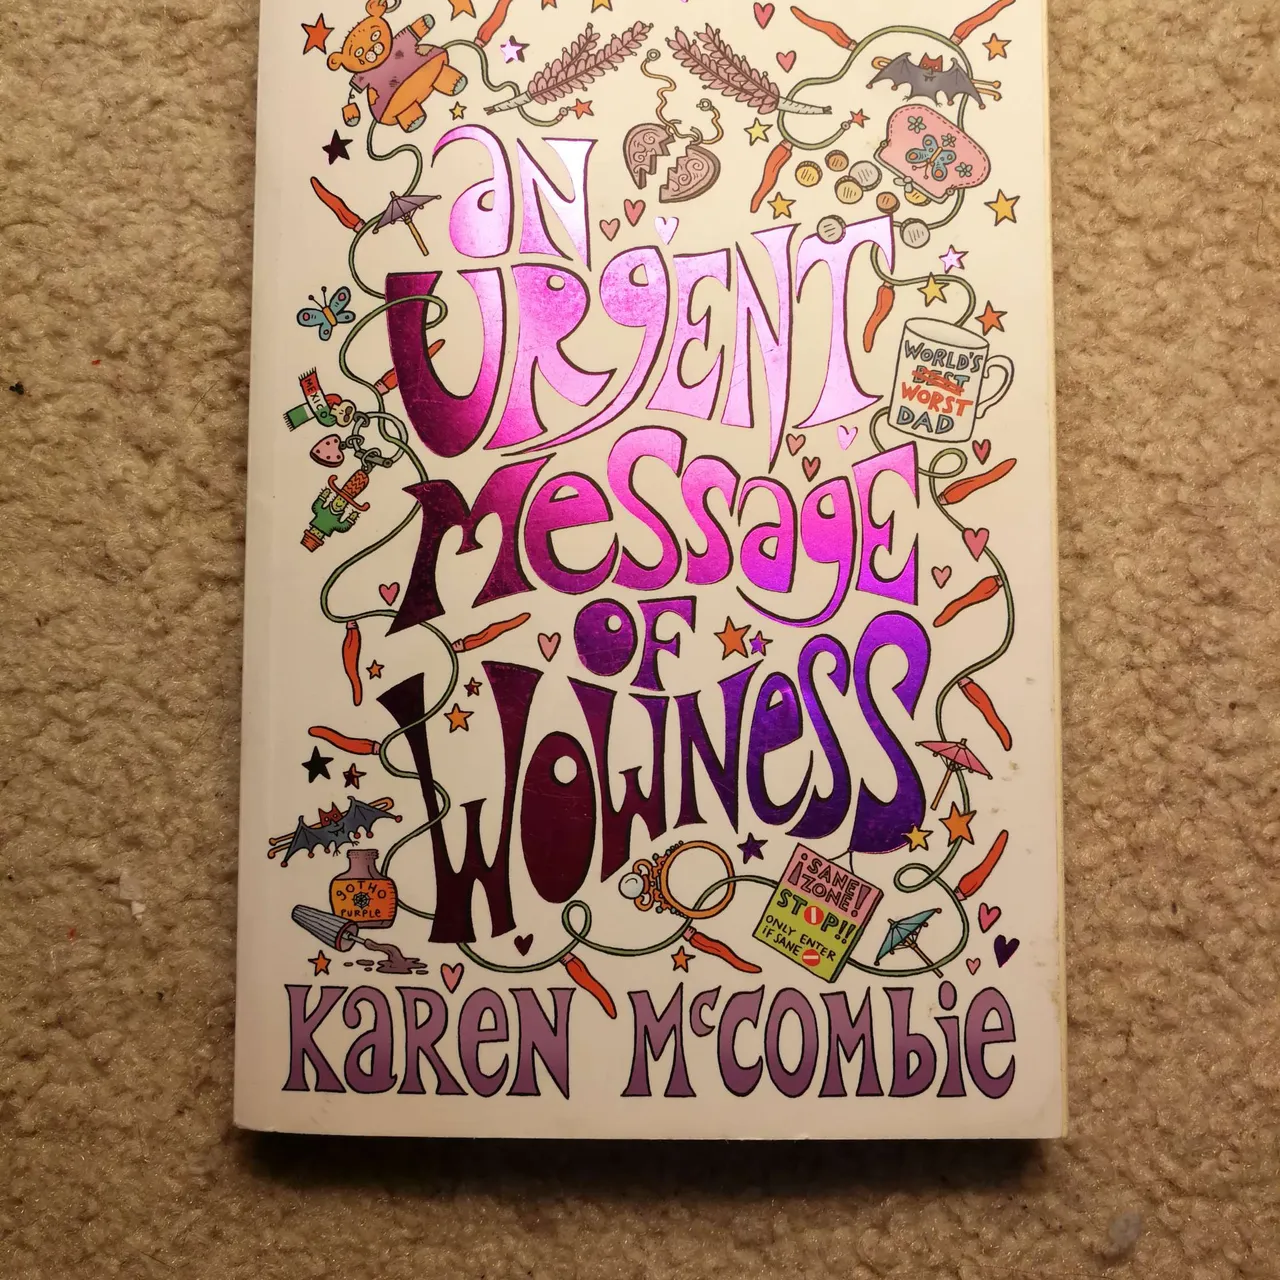 *FREE An Urgent Message of Wowness by Karen McCombie photo 1